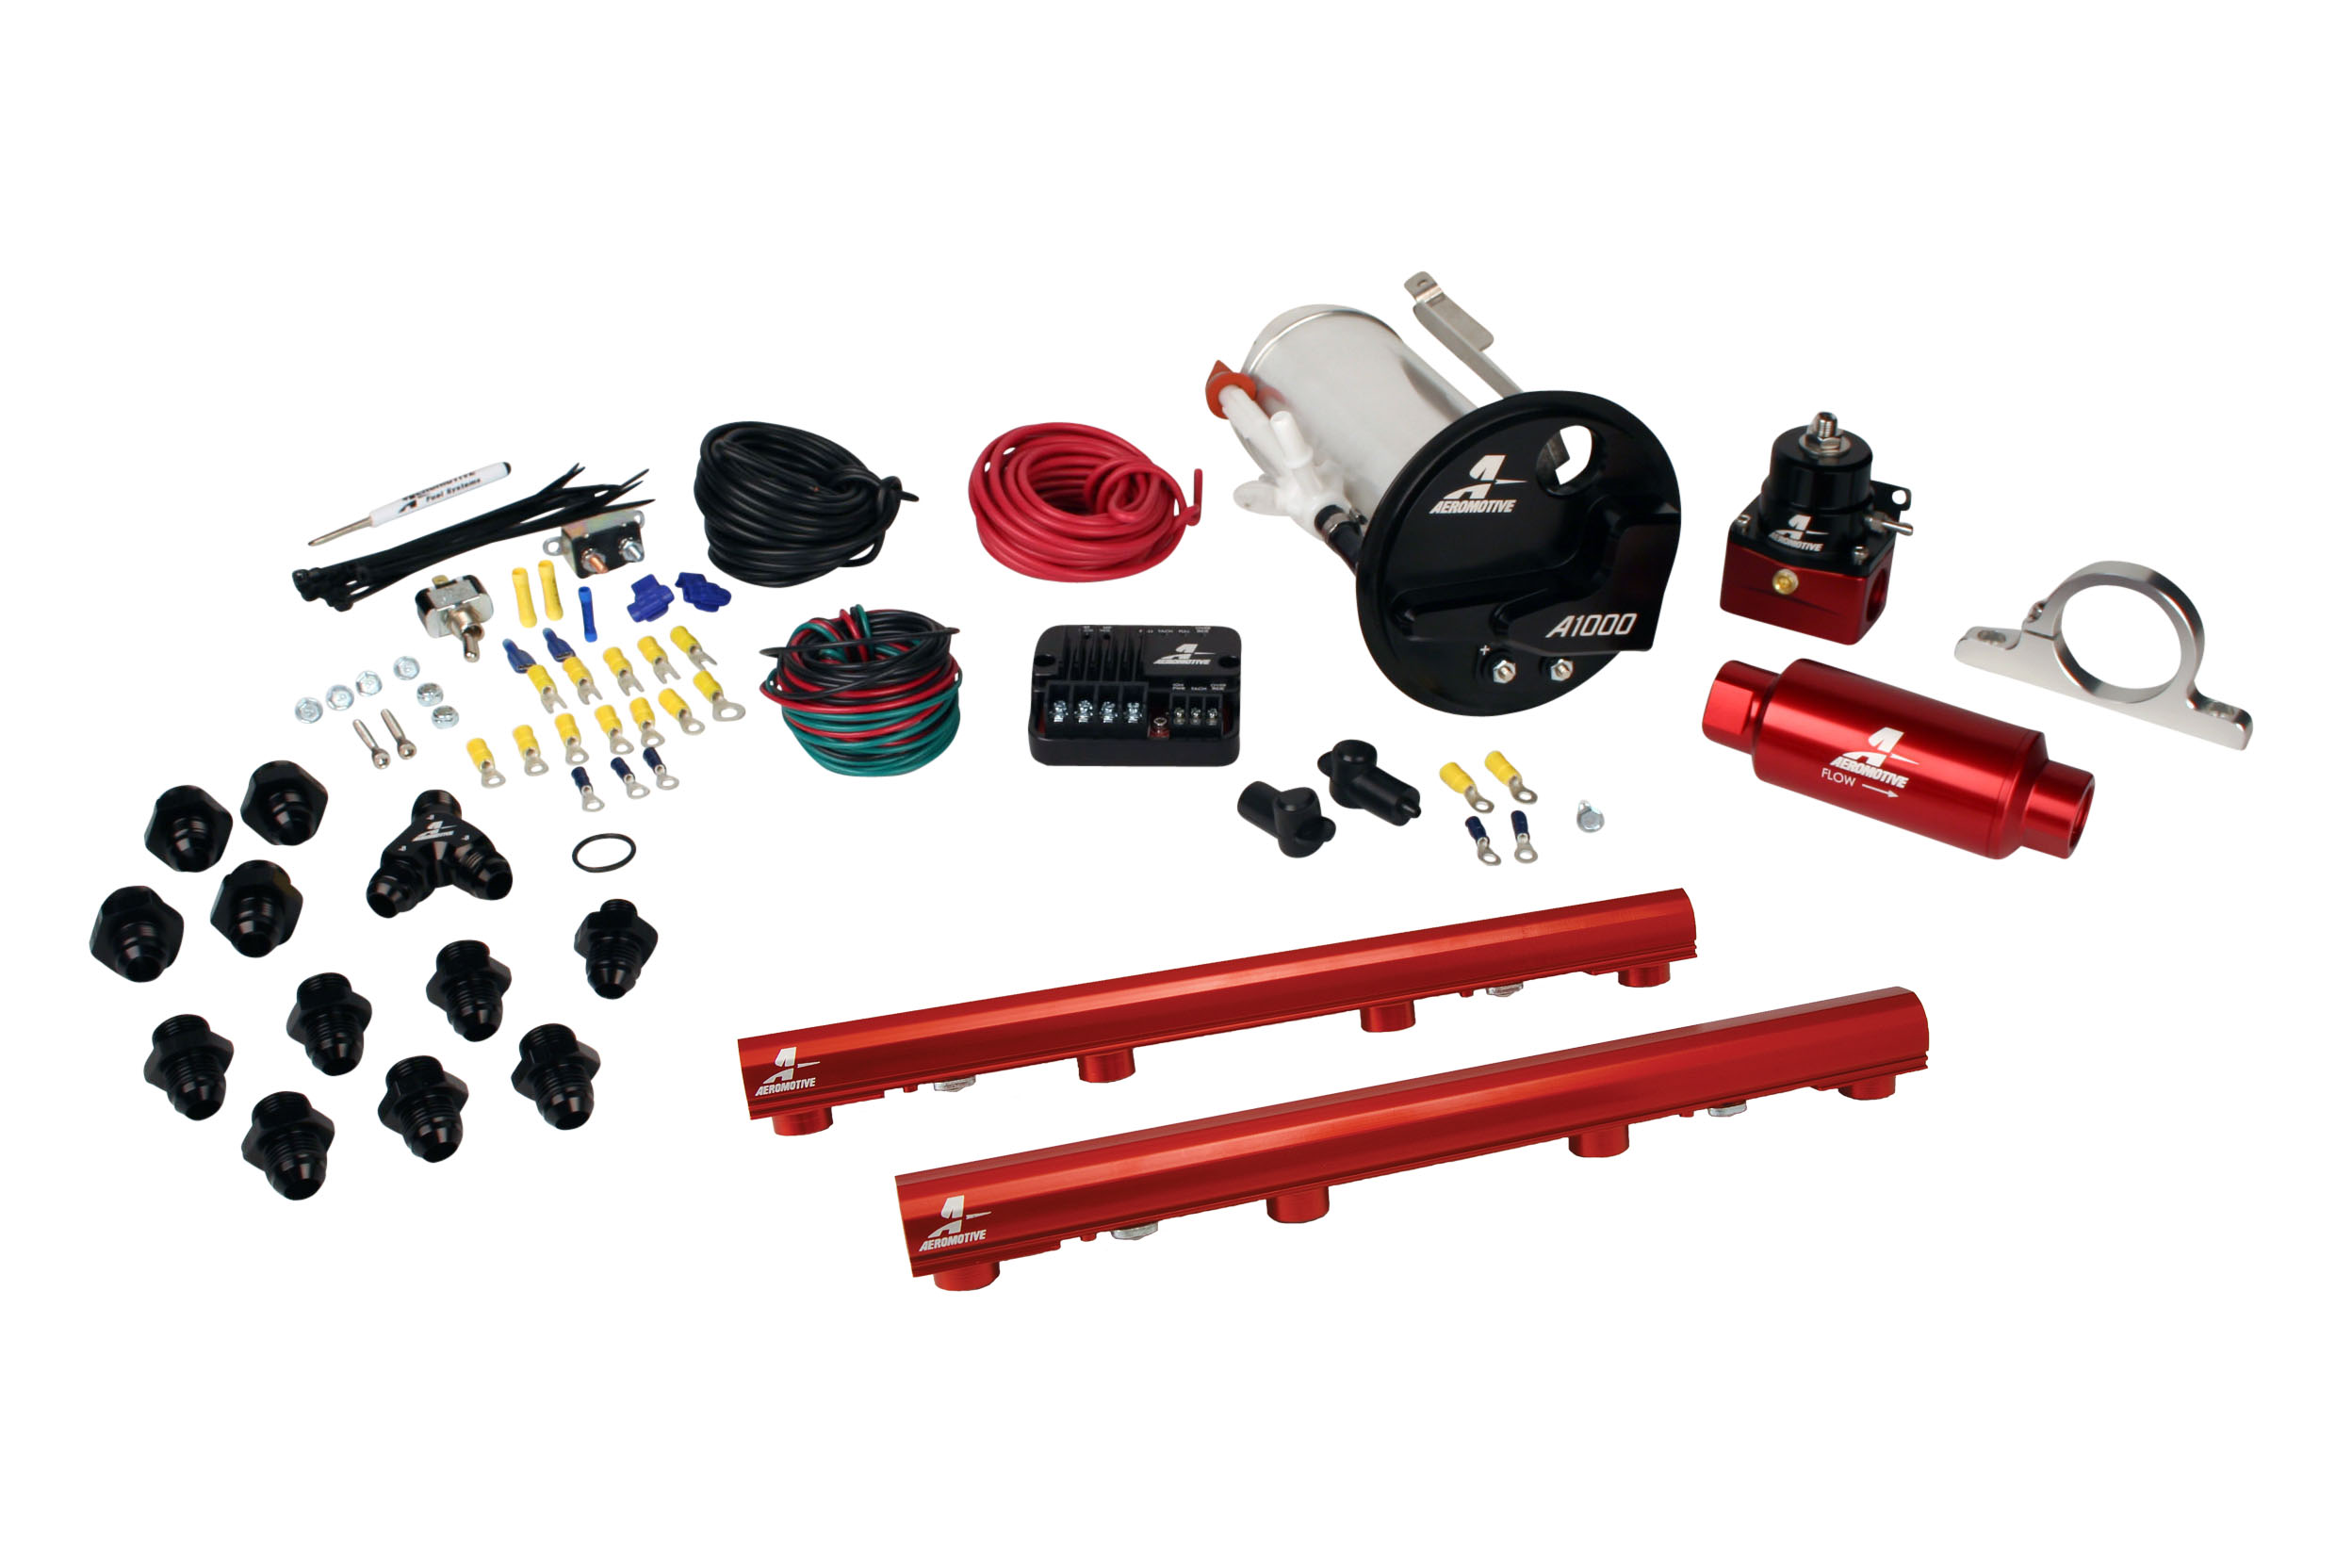 2007-2012 Ford Mustang Shelby GT500 Aeromotive Stealth A1000 Street Fuel System w/4.6L 3-V Fuel Rails